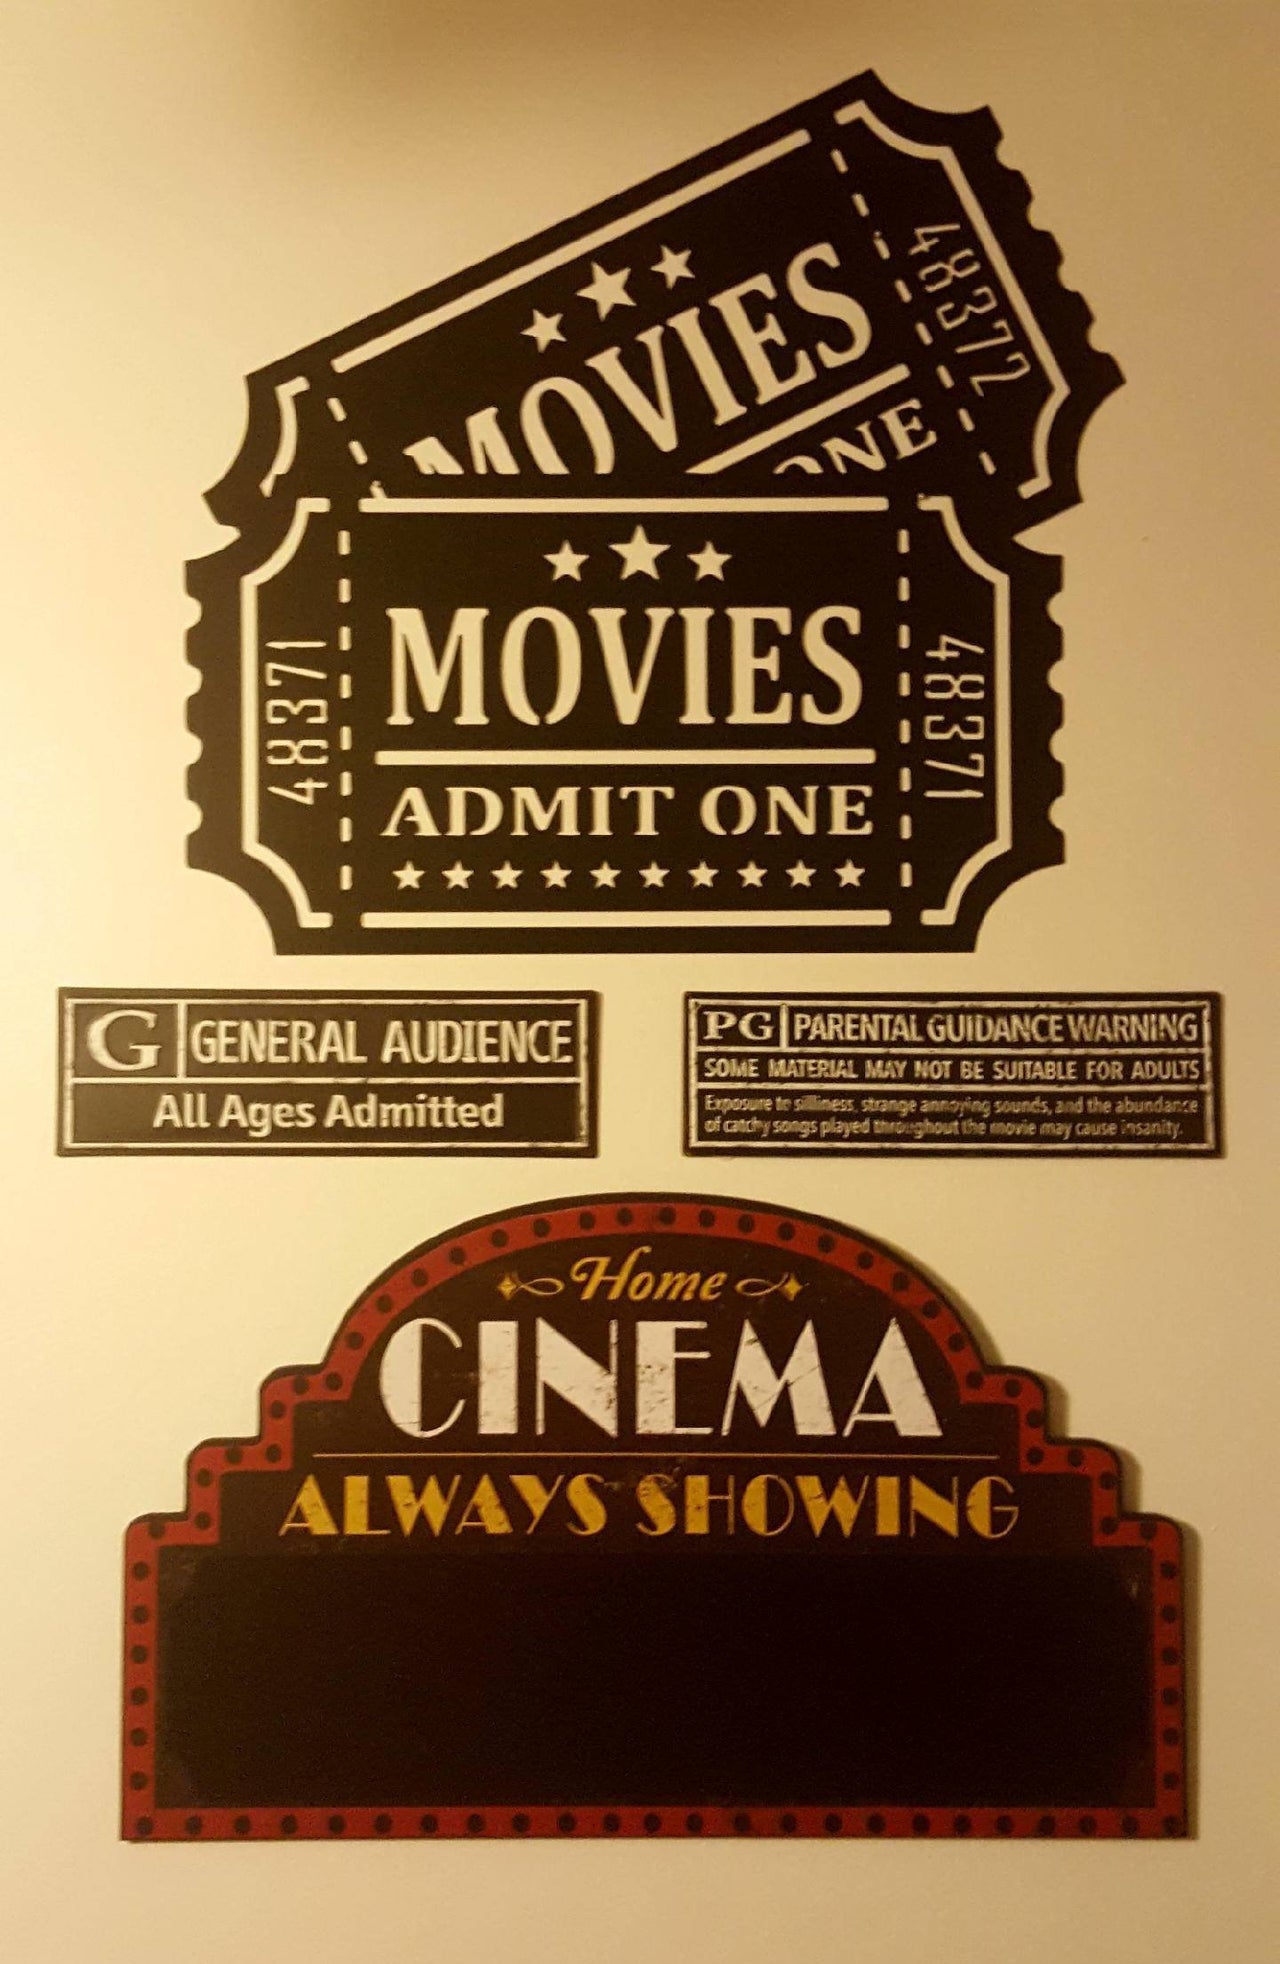 Metal Movie Tickets Sign | Movie Theater Decor | Admit One Sign | Home Theater Gifts | Metal Wall Art |  Movie Night Theater Room Props